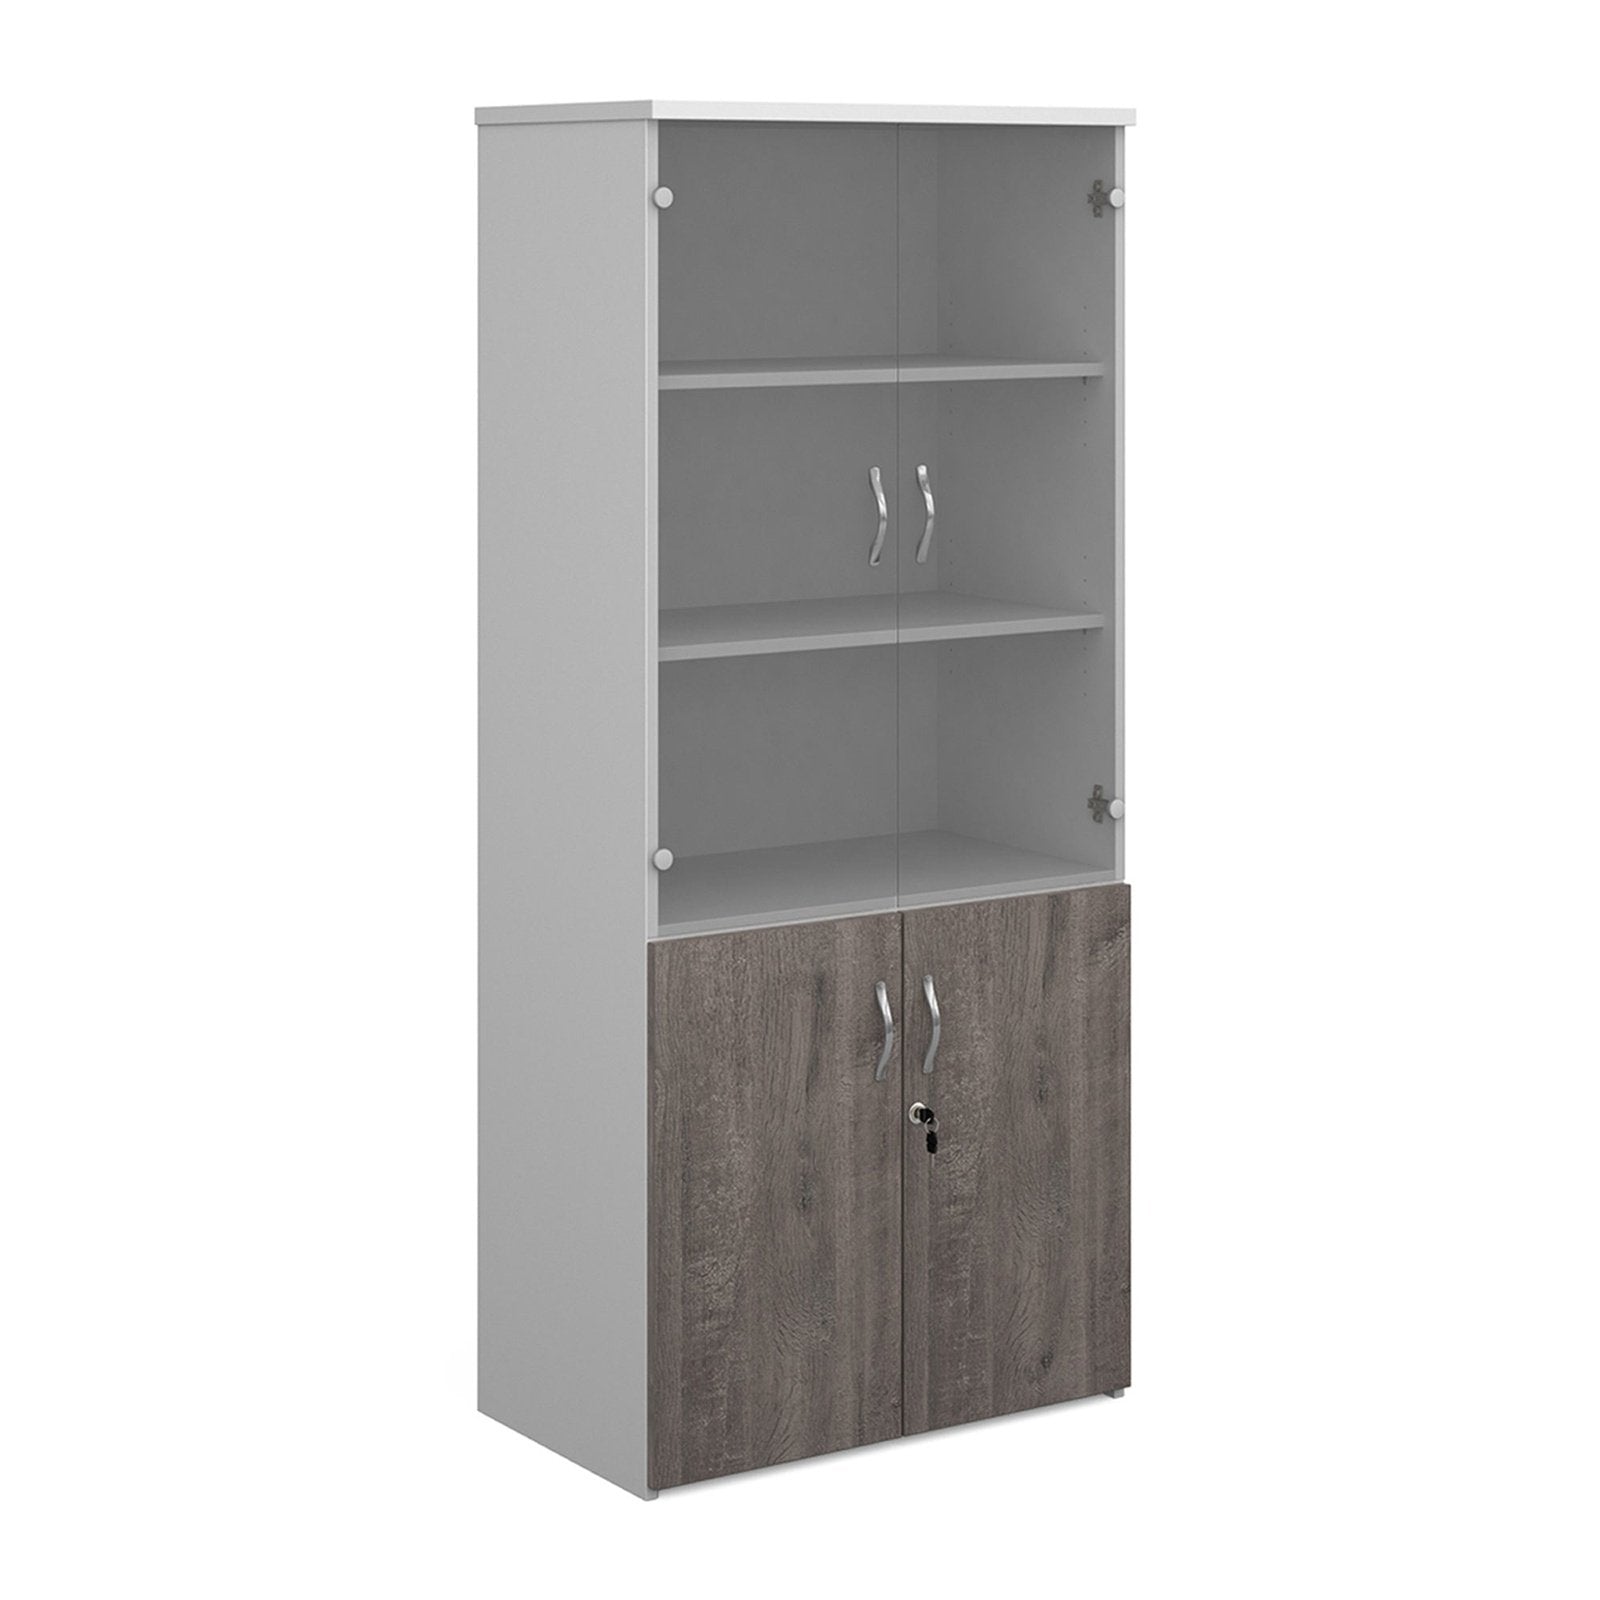 Duo combination unit glass upper 1790mm high 4 shelves - white with grey oak lower doors - Office Products Online